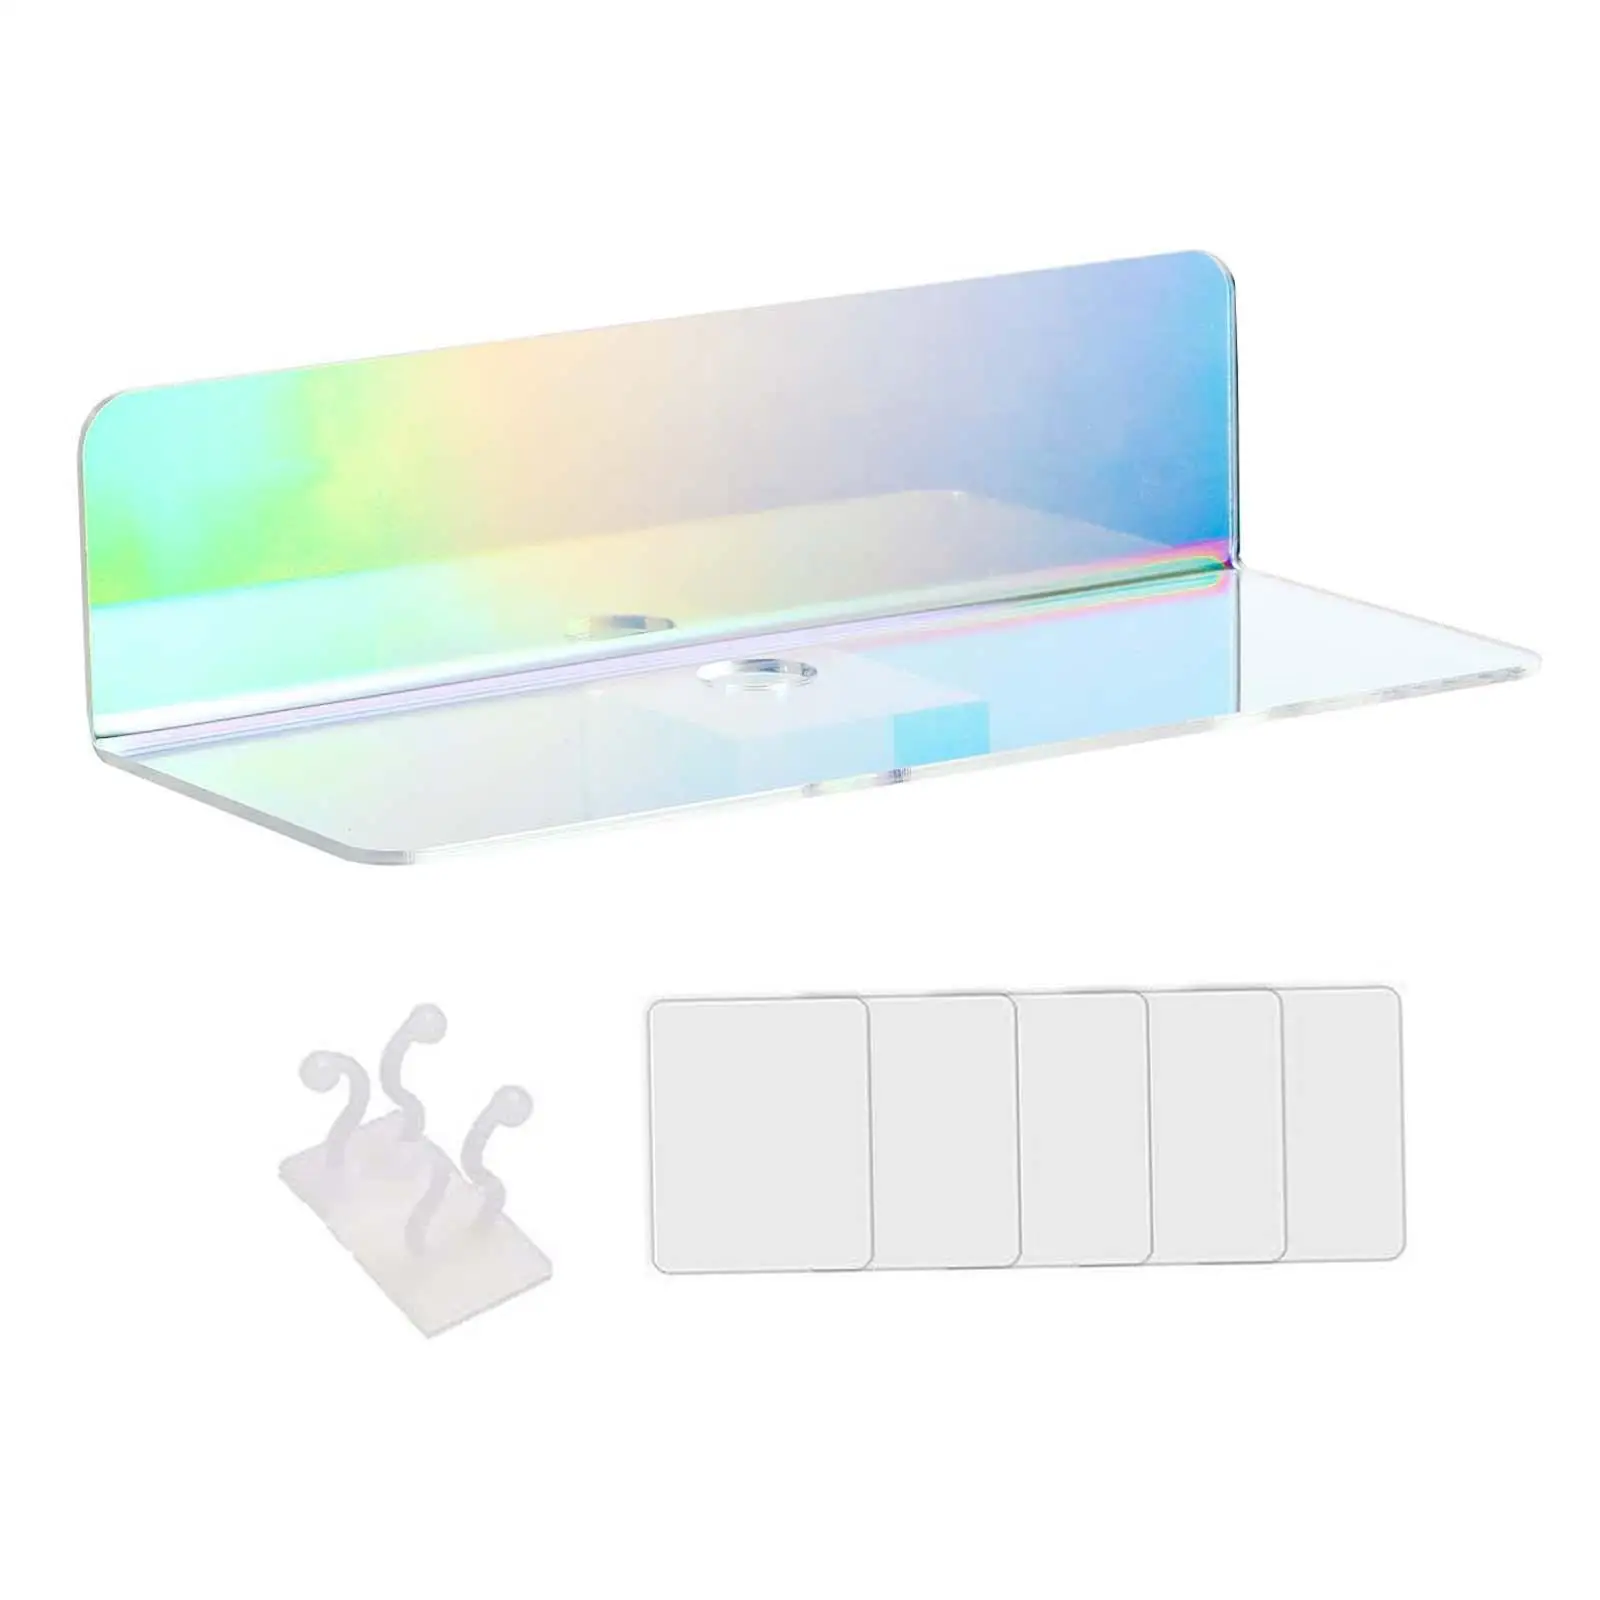 1Pcs Acrylic Floating Wall Ledge Shelf Display Organizer Storage Shelves Wall Mount for Home Indoor Living Room Kitchen Decor